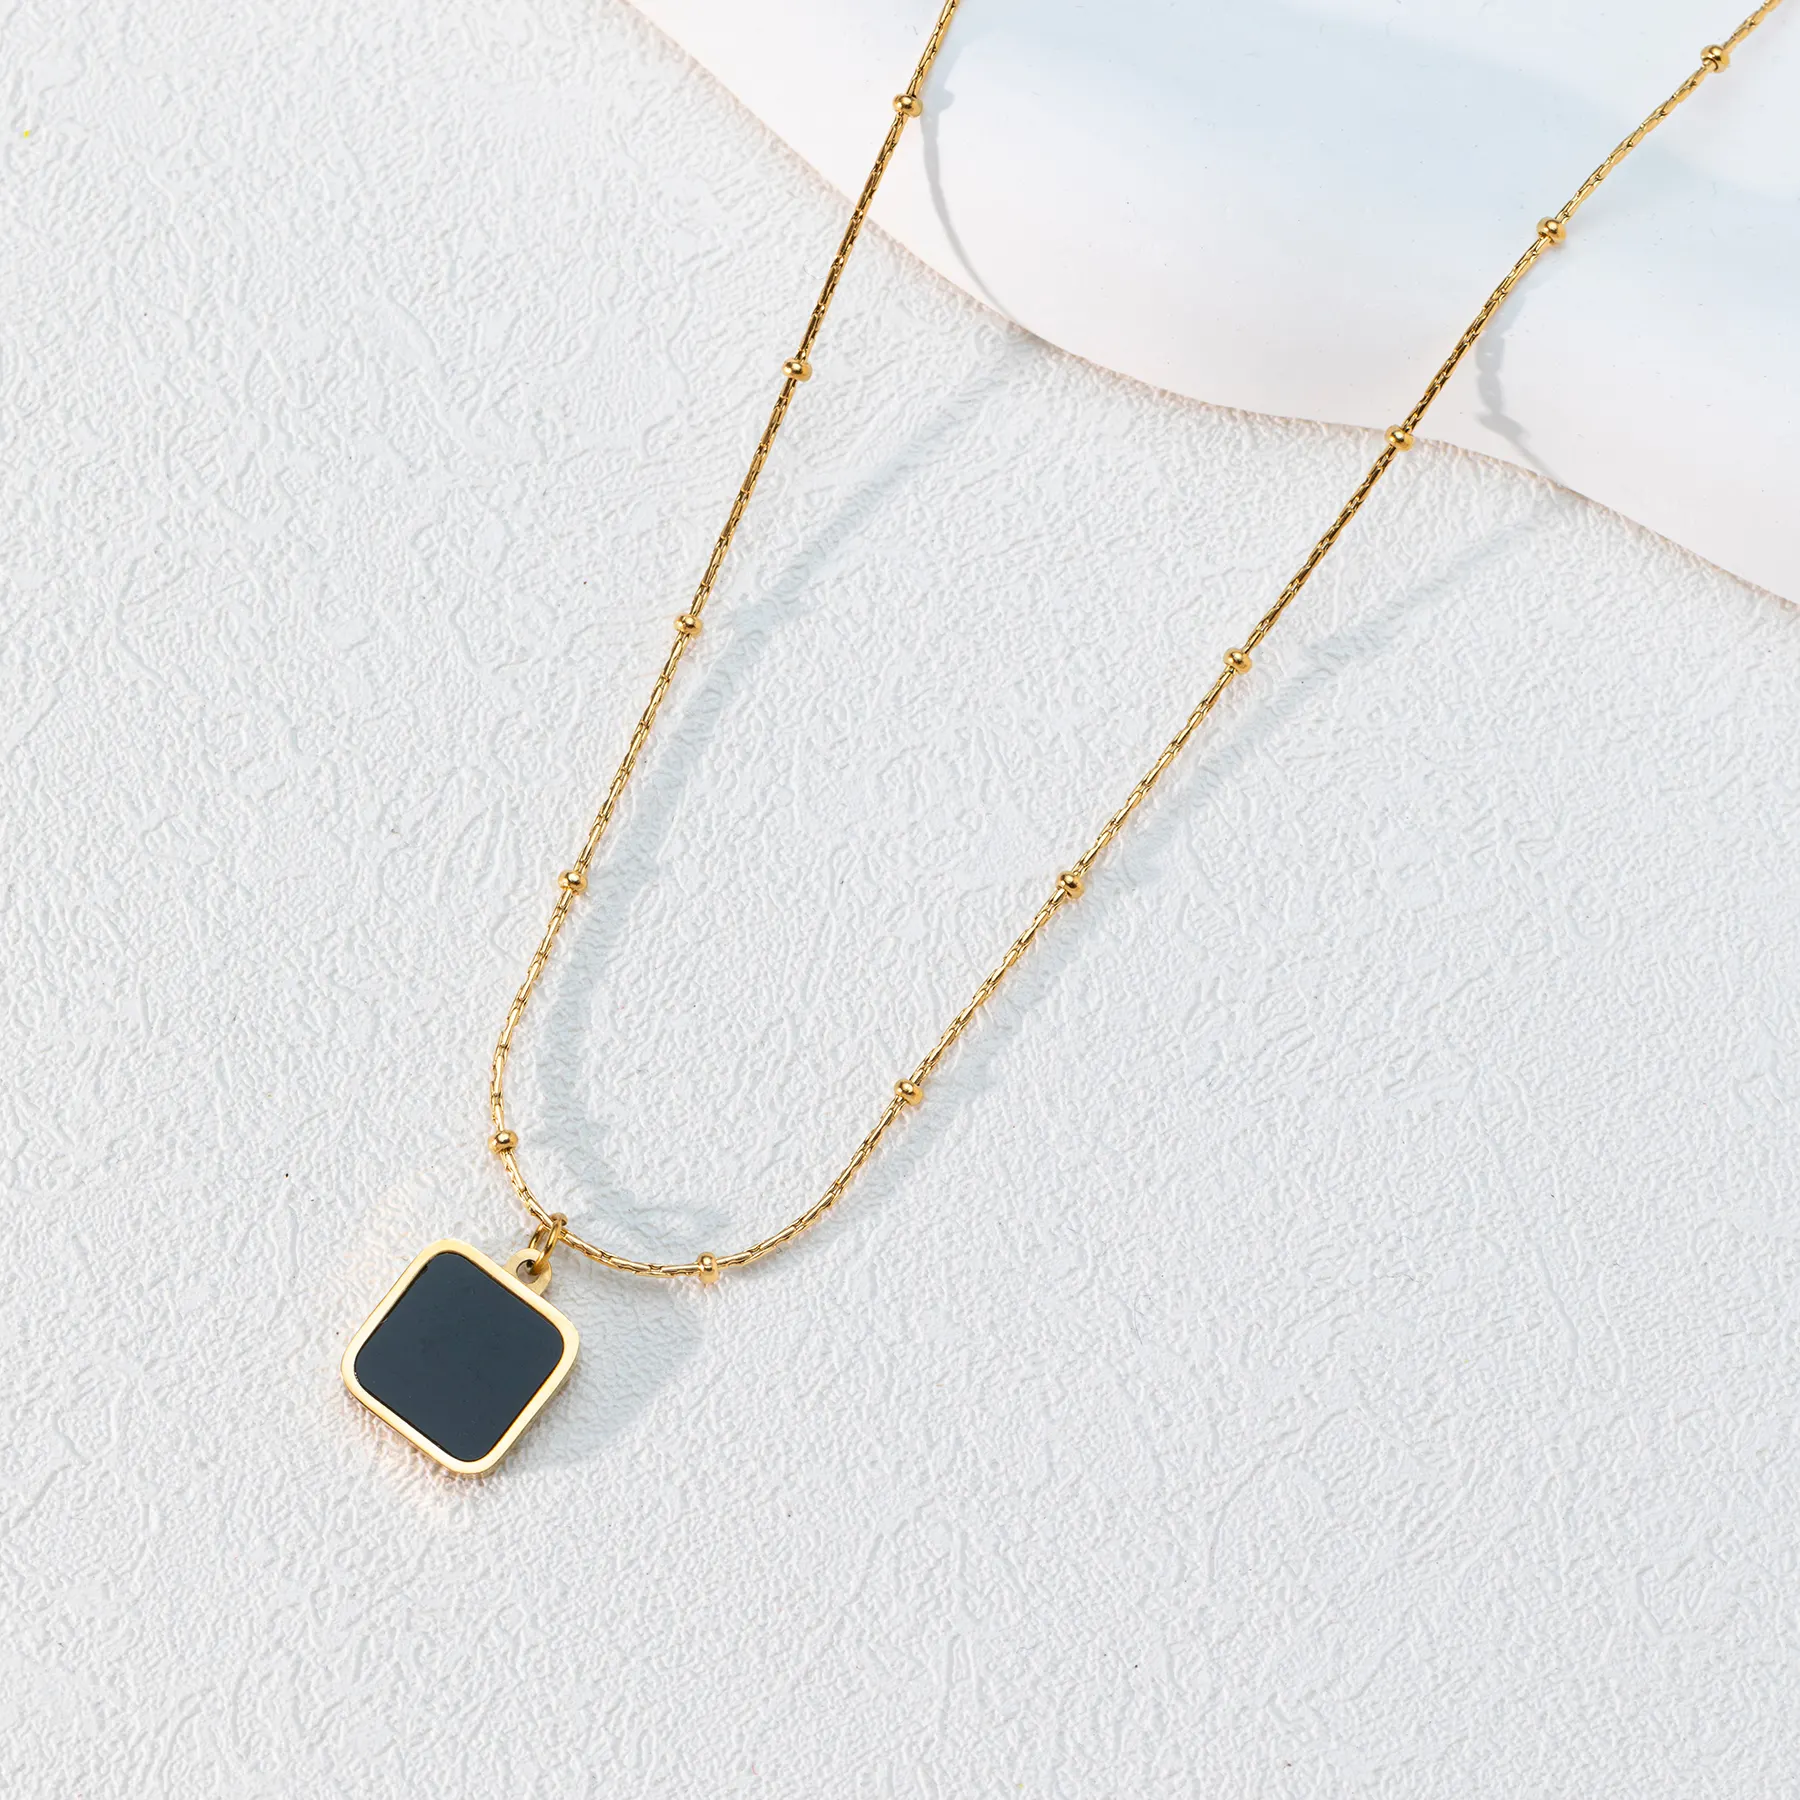 Elegant Chain Necklace Chain Square Black Pendant Necklace Stainless Steel Necklace Jewelry Wholesale